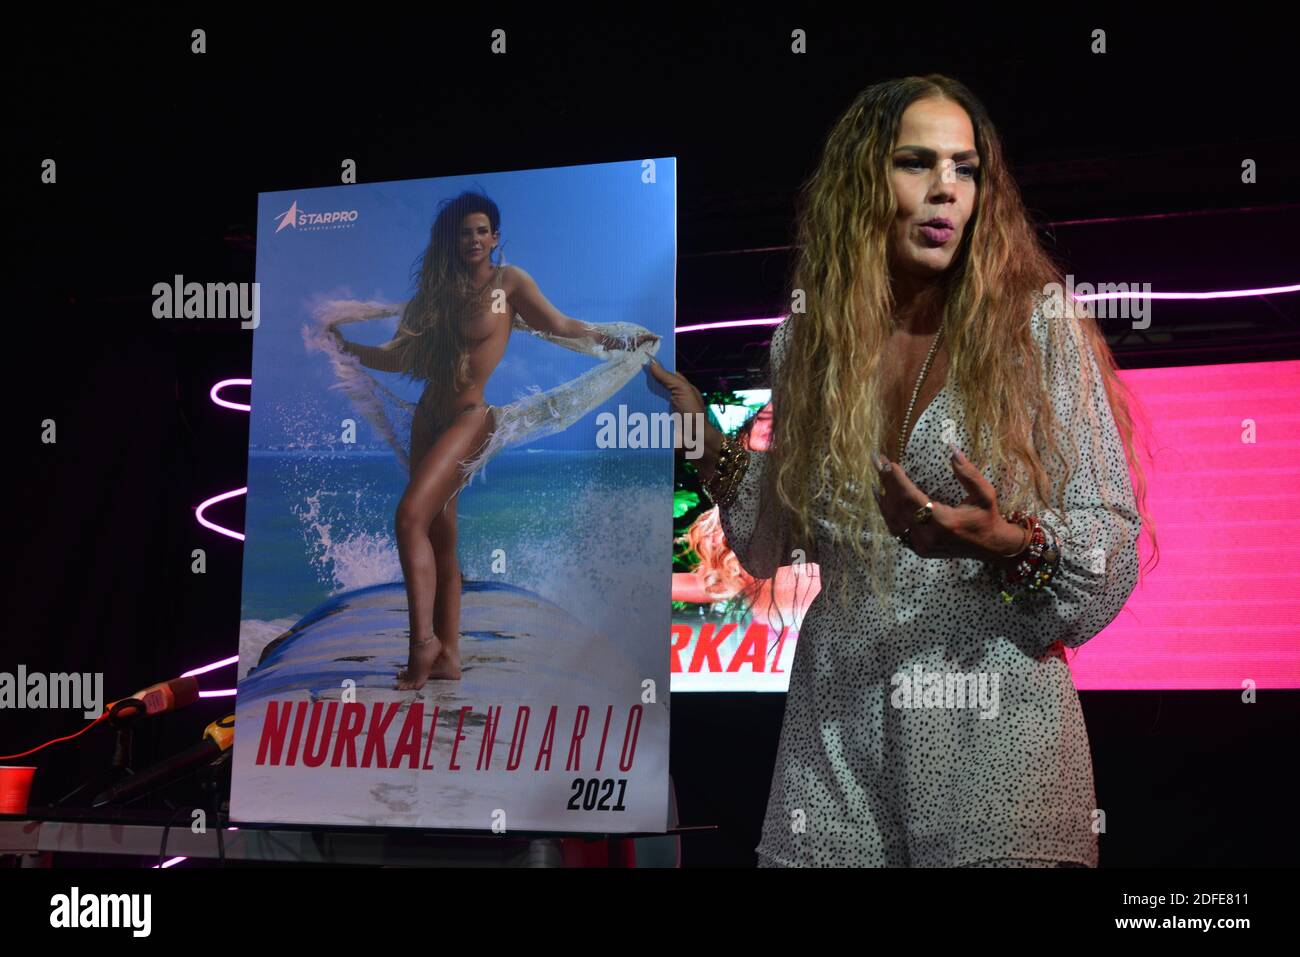 Mexico City, Mexico. 03rd Dec, 2020. Actress Niurka Marcos poses for photos during a press conference to launch her calendar ‘Niurkalendar' at Rico Club. (Photo by Eyepix Group/Pacific Press) Credit: Pacific Press Media Production Corp./Alamy Live News Stock Photo